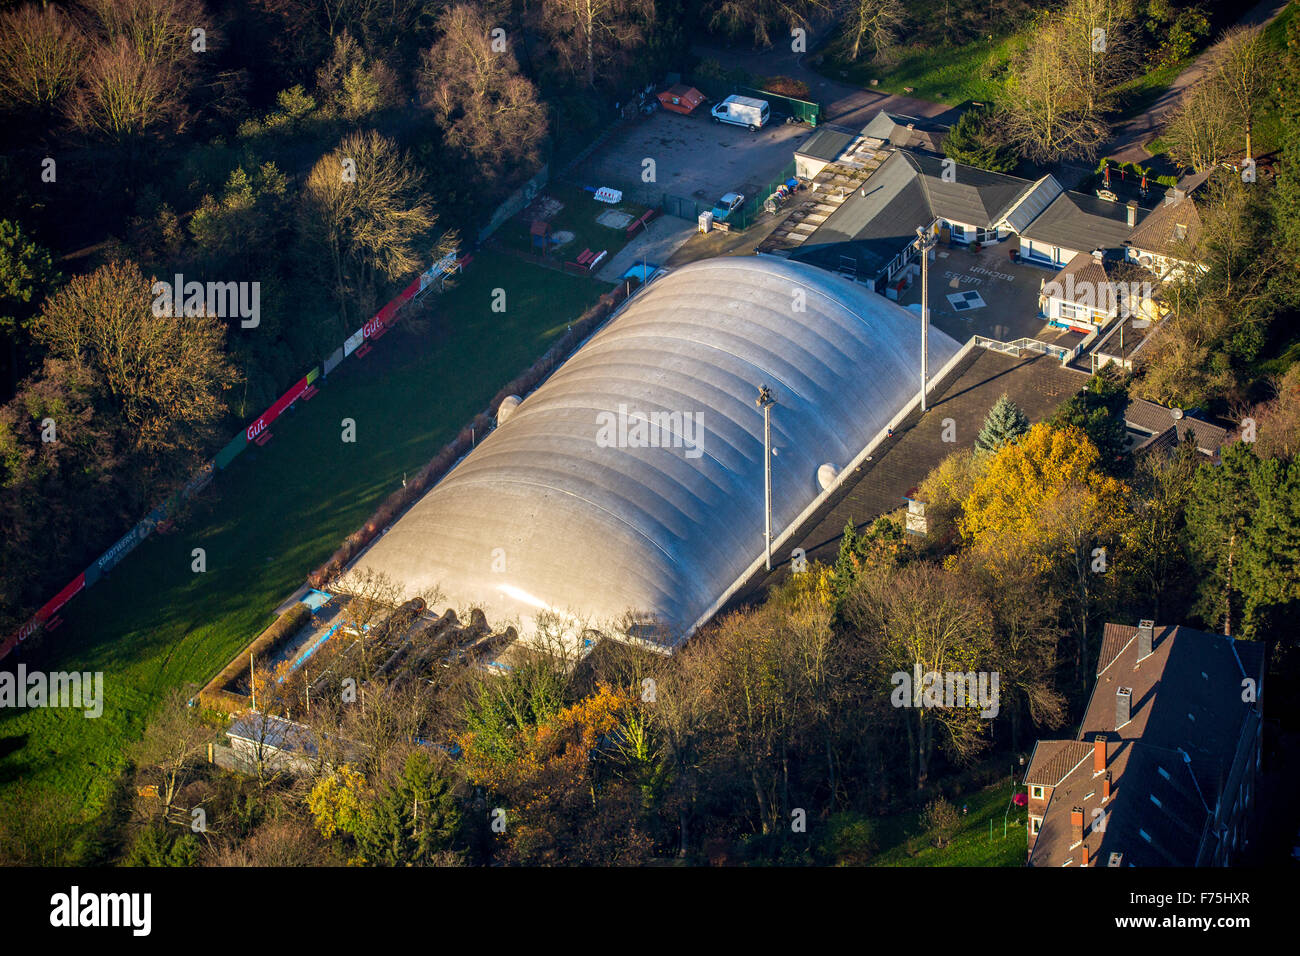 Outdoor pool with air-inflated hall of the swimming club Blau-Weiß Bochum, Am Wiesengrund, Bochum, Ruhr area Stock Photo